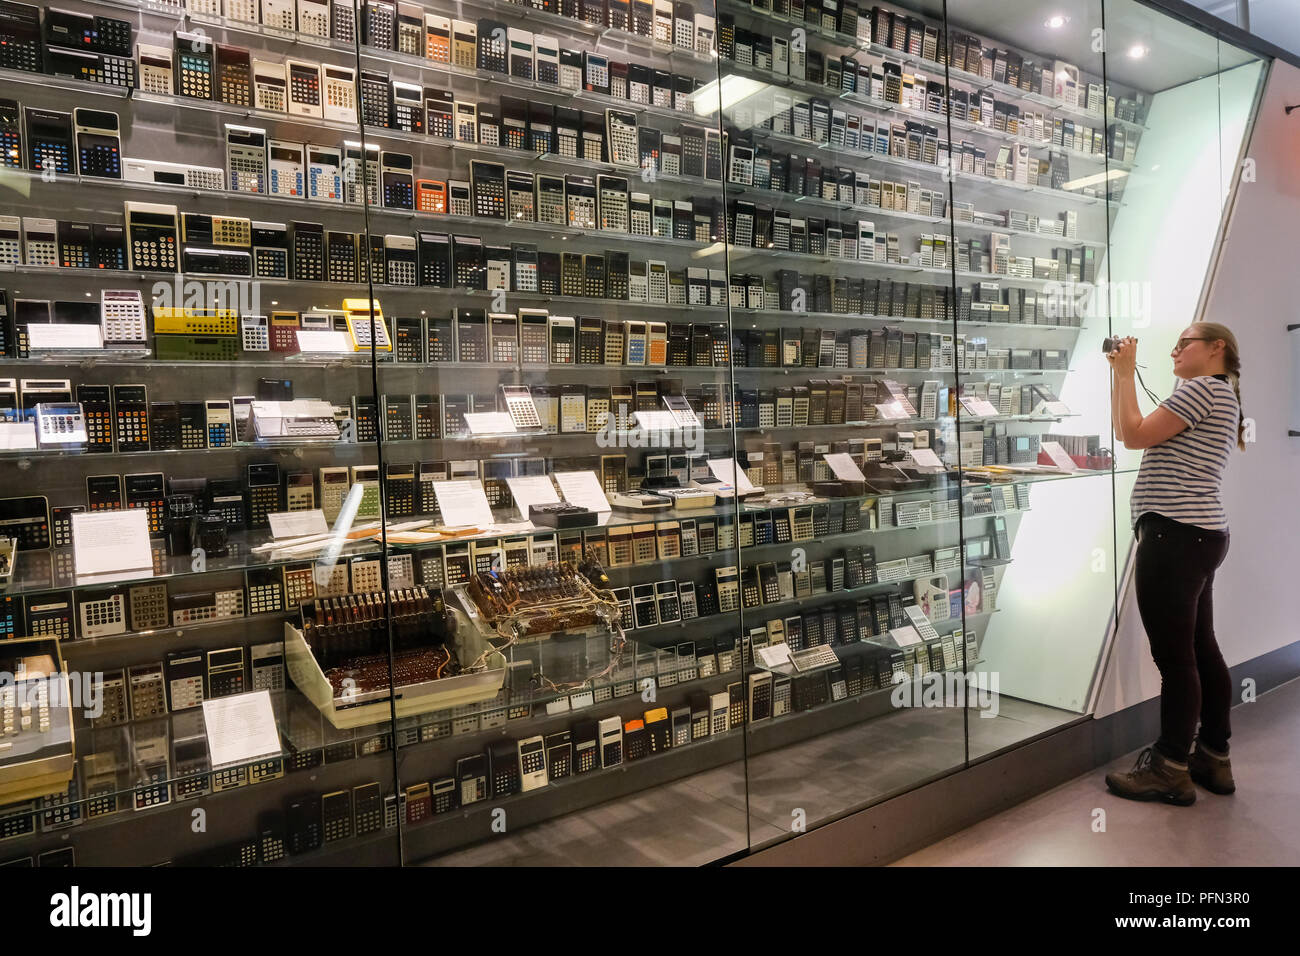 Exhibition of the evolution of the calculator at the Heinz Nixdorf MuseumsForum (HNF) in Paderborn, Germany Stock Photo